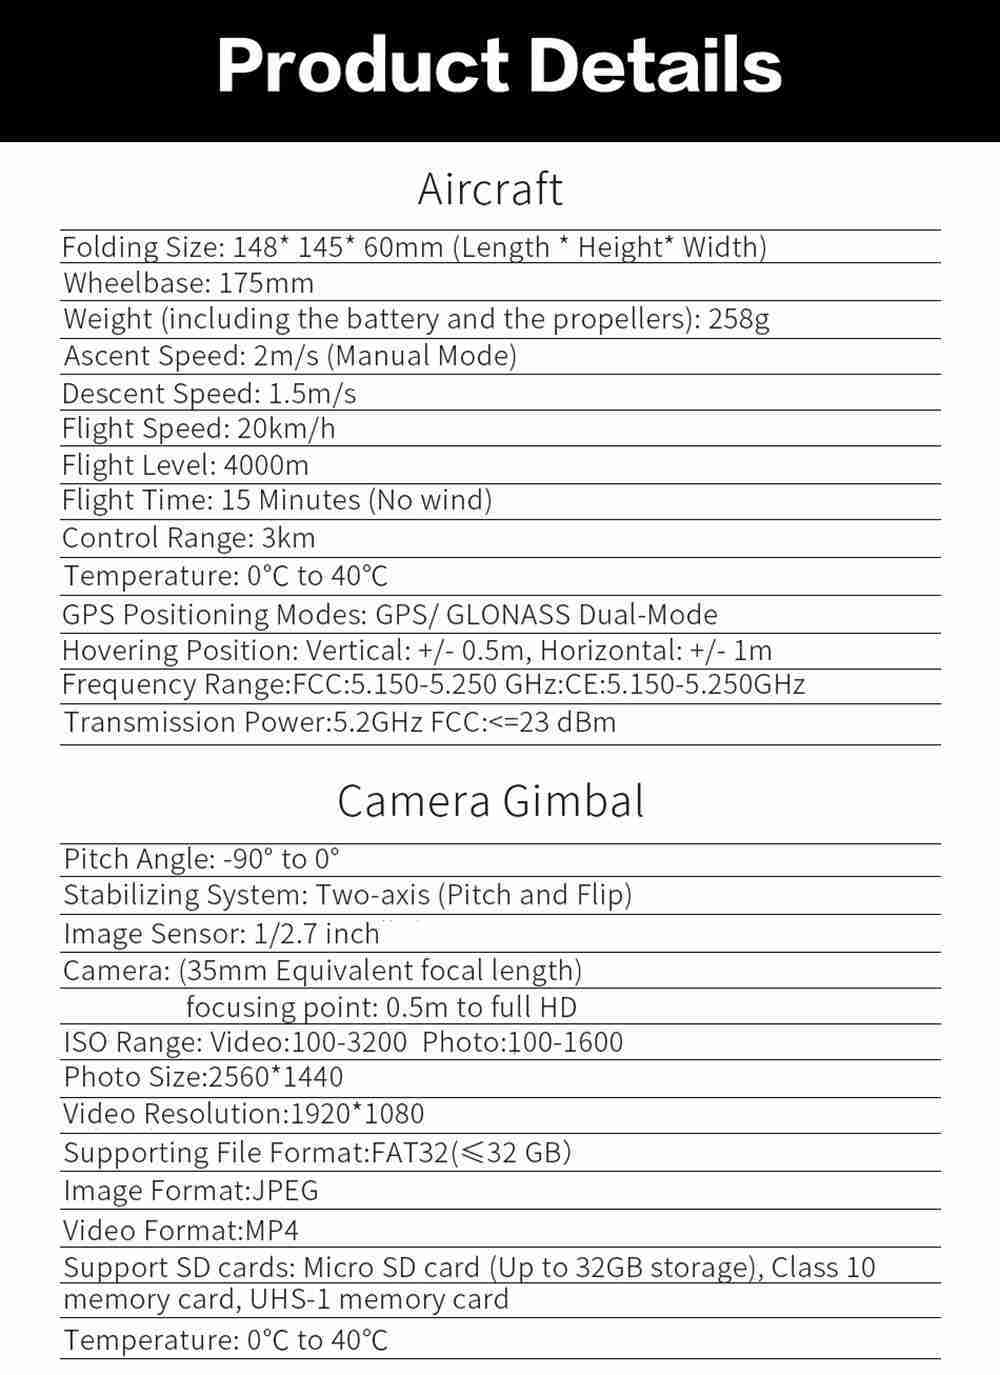 JJRC X9P Heron 4K Version 5G WIFI 1KM FPV GPS RC Drone With 2-Axis Gimbal 50X Digital Zoom Optical Flow Positioning RTF - Two Batteries With Bag